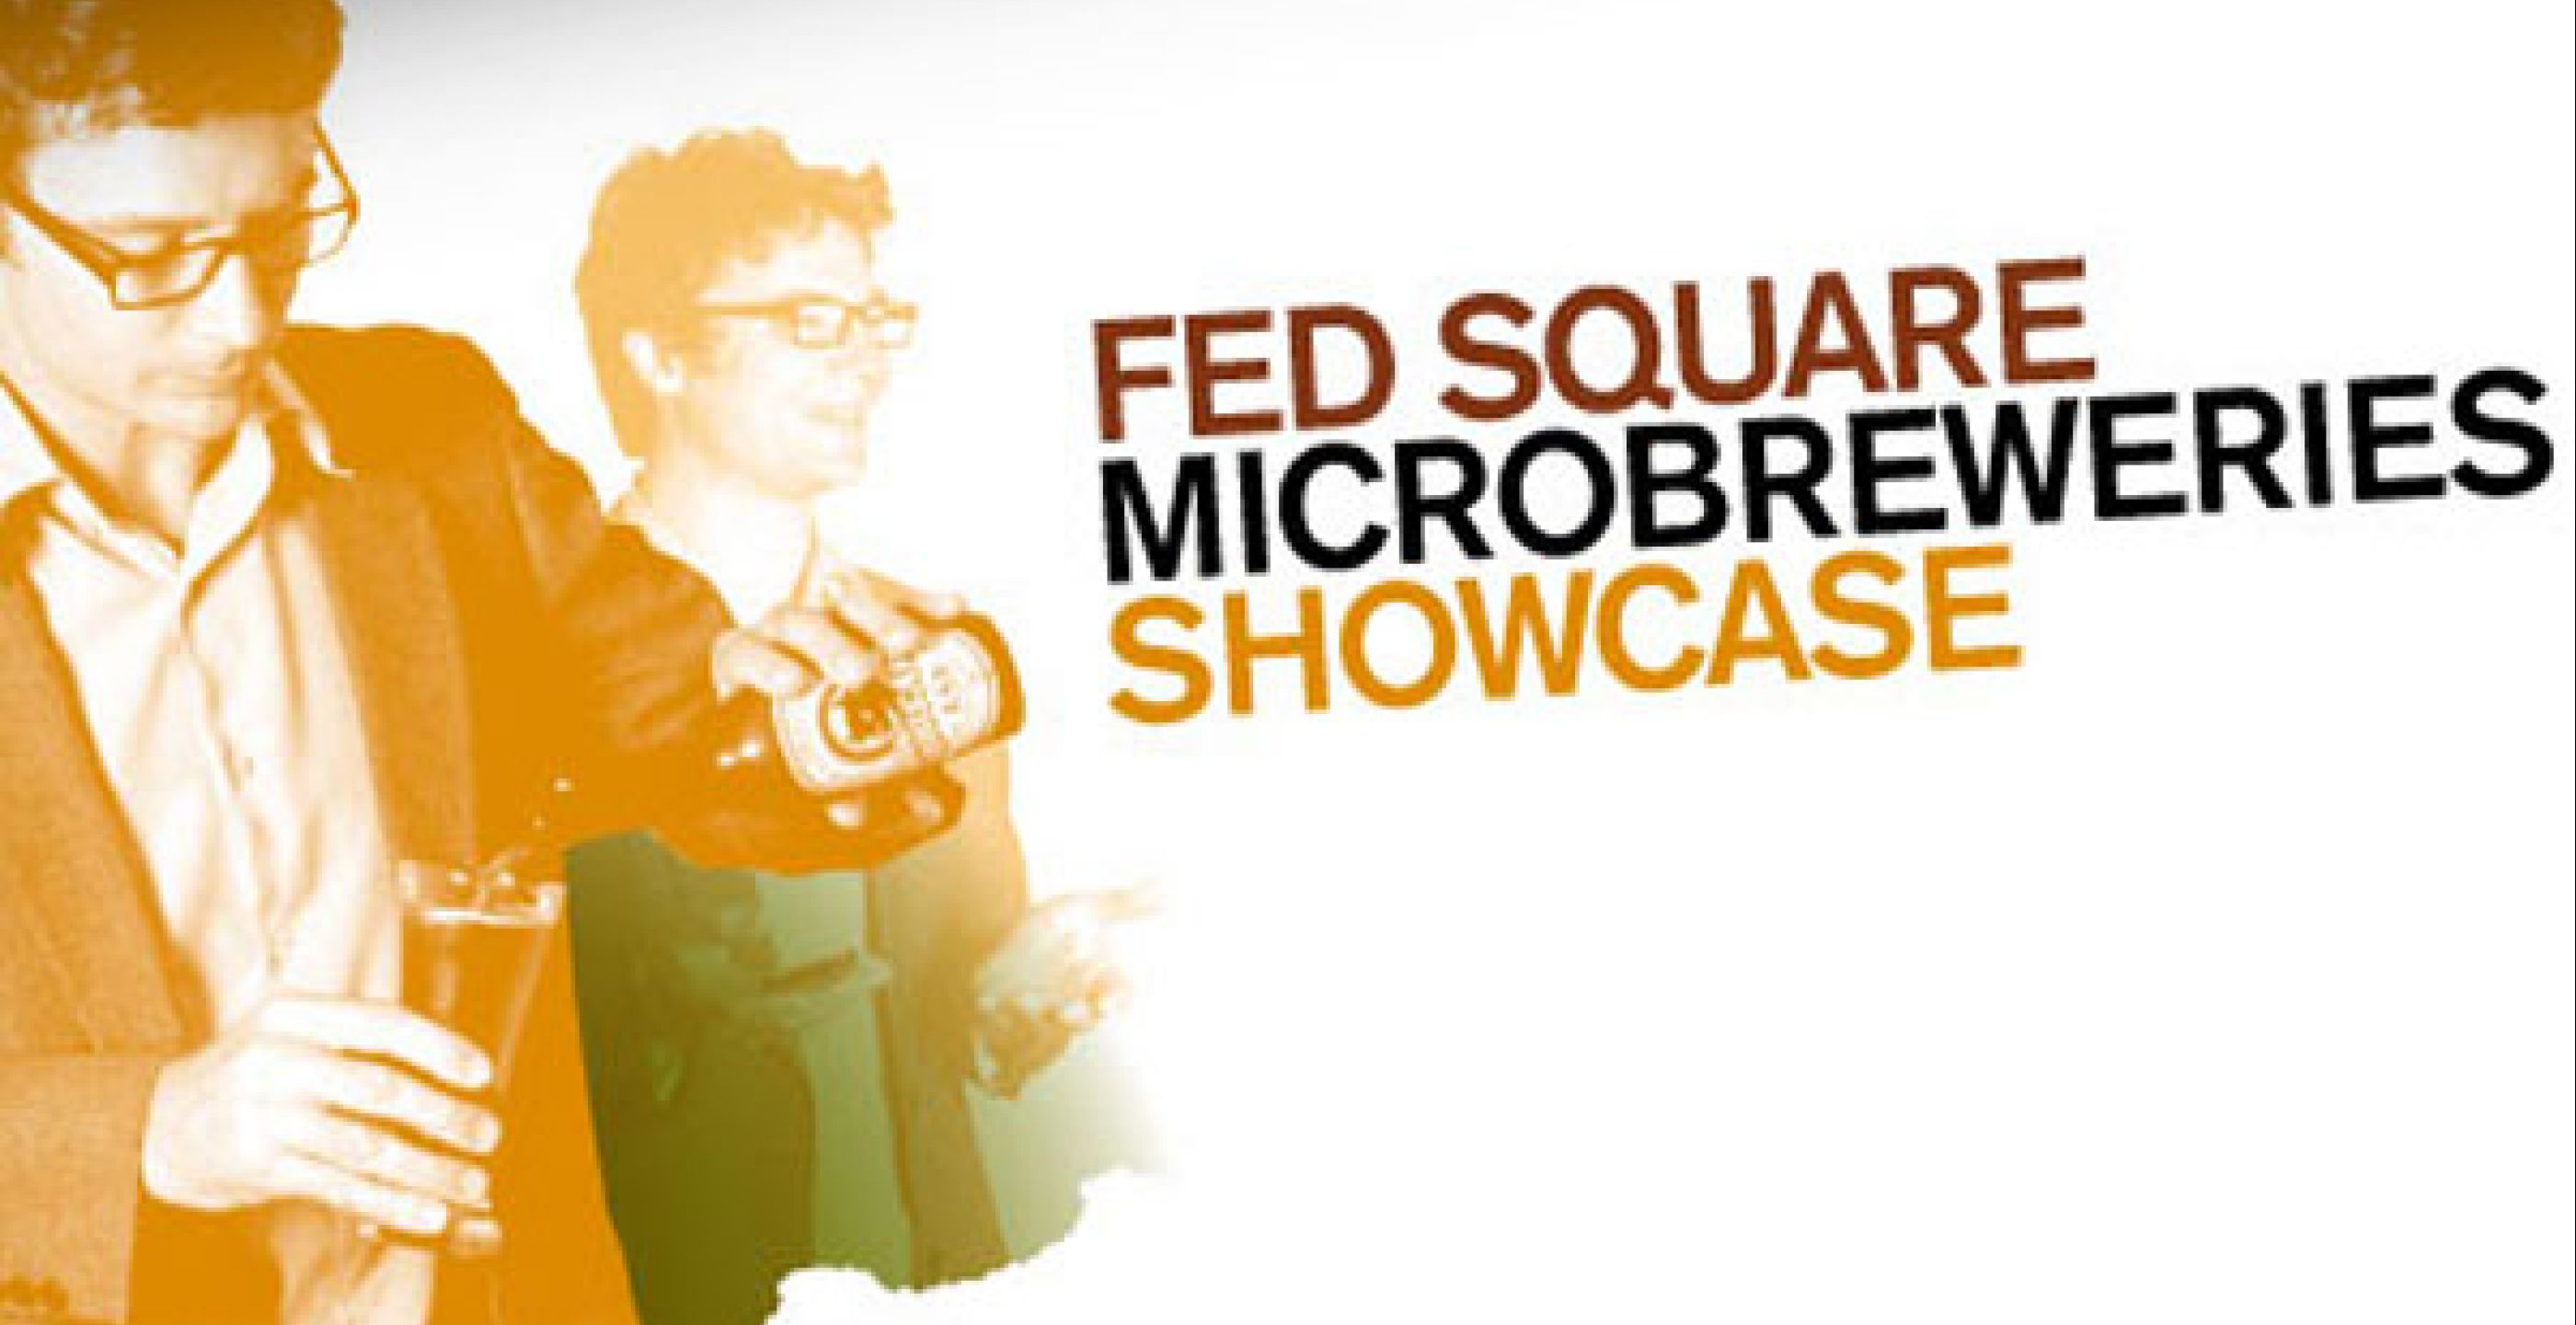 COMPETITION: Win free passes to the Fed Square Microbreweries Showcase